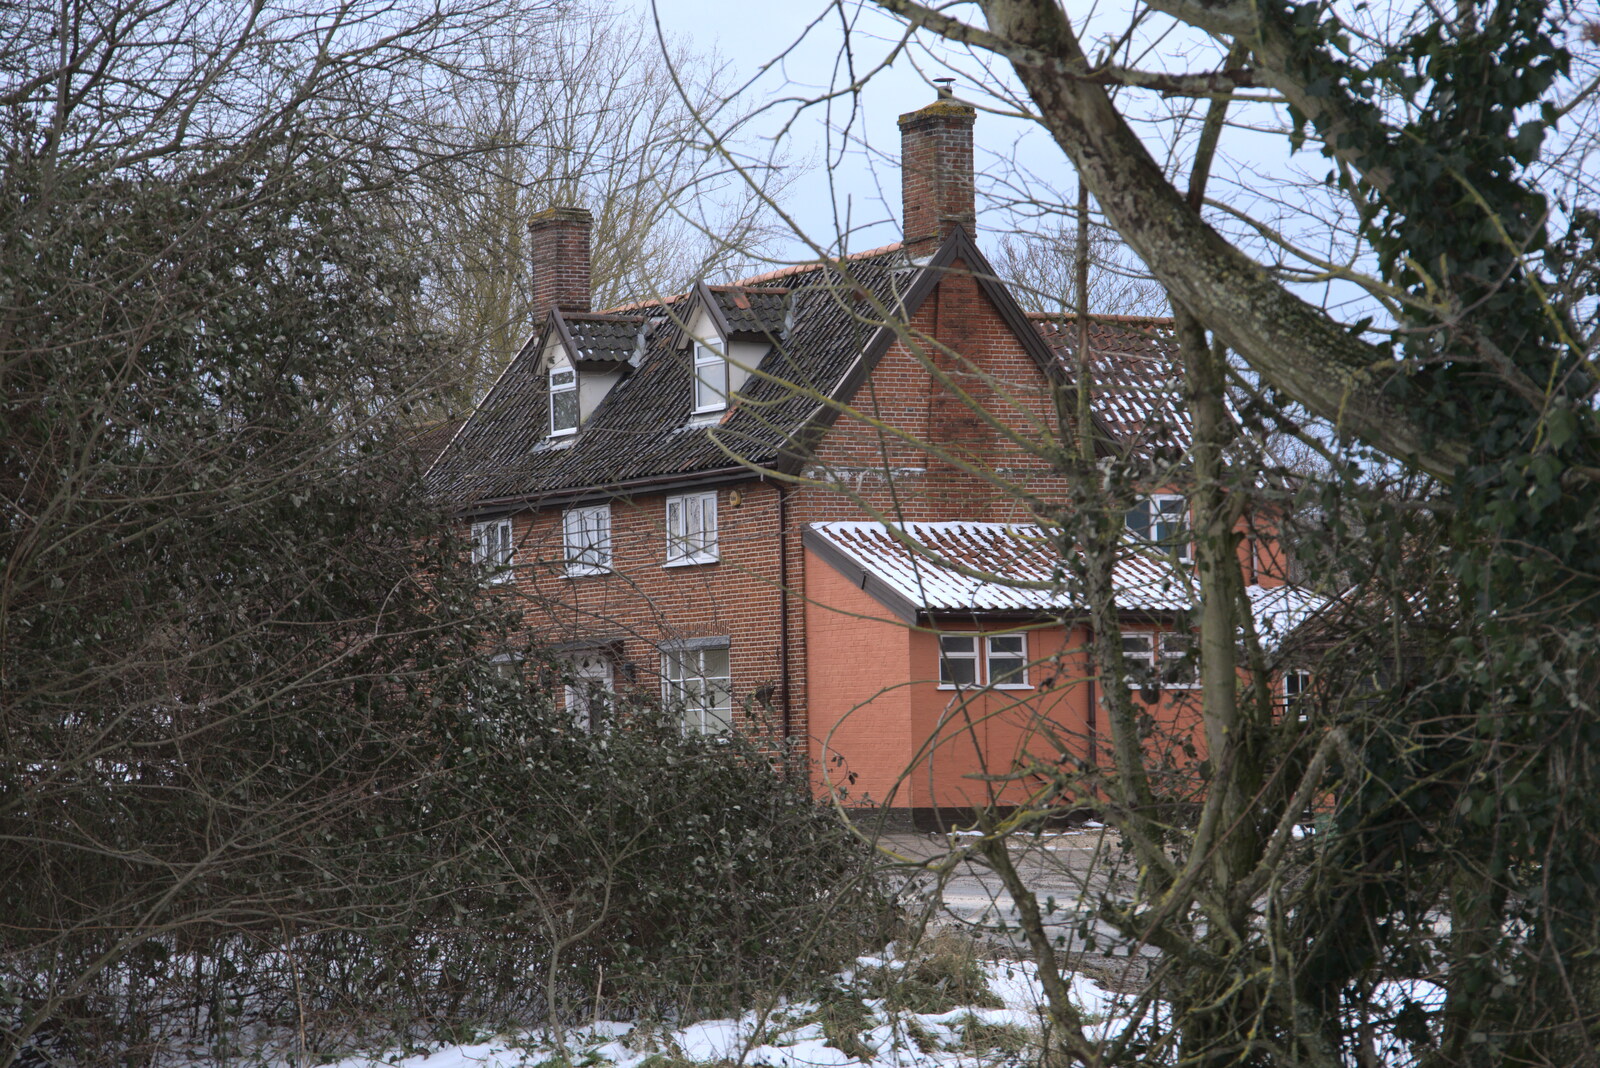 The Old Swan Inn from Derelict Infants School and Ice Sculptures, Diss and Palgrave, Norfolk and Suffolk - 13th February 2021